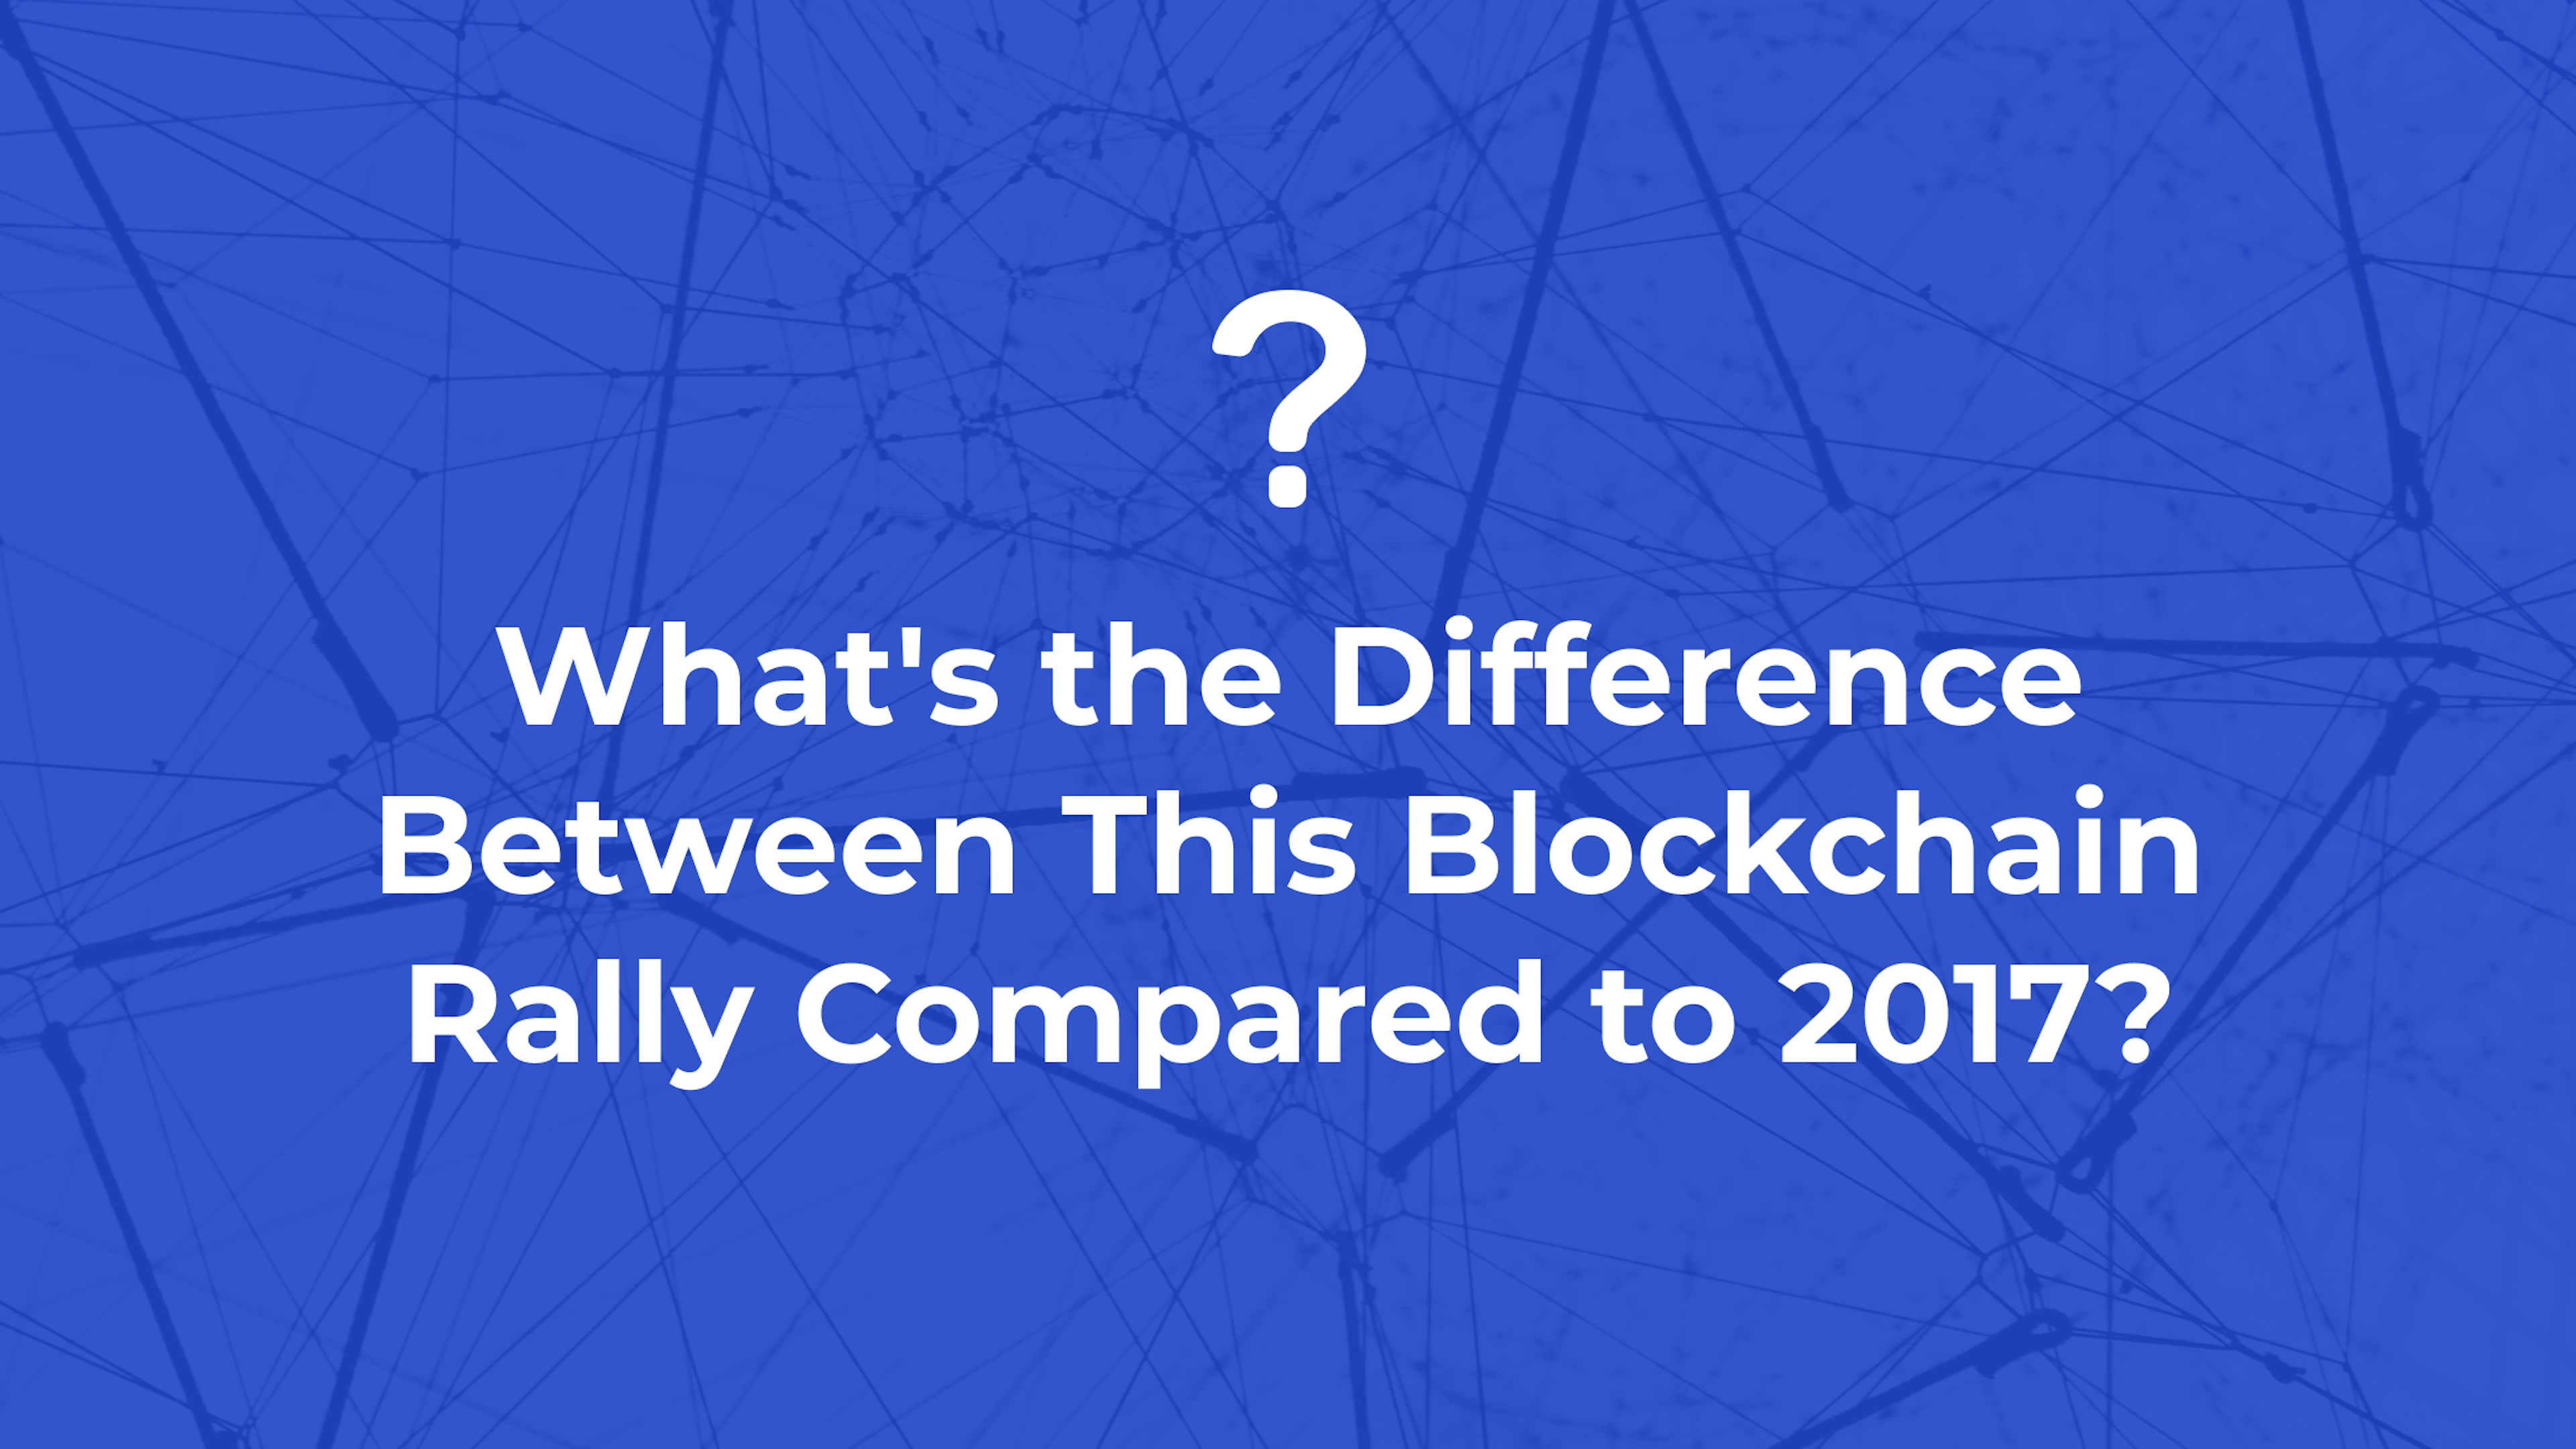 What's the Difference Between This Blockchain Rally Compared to 2017?